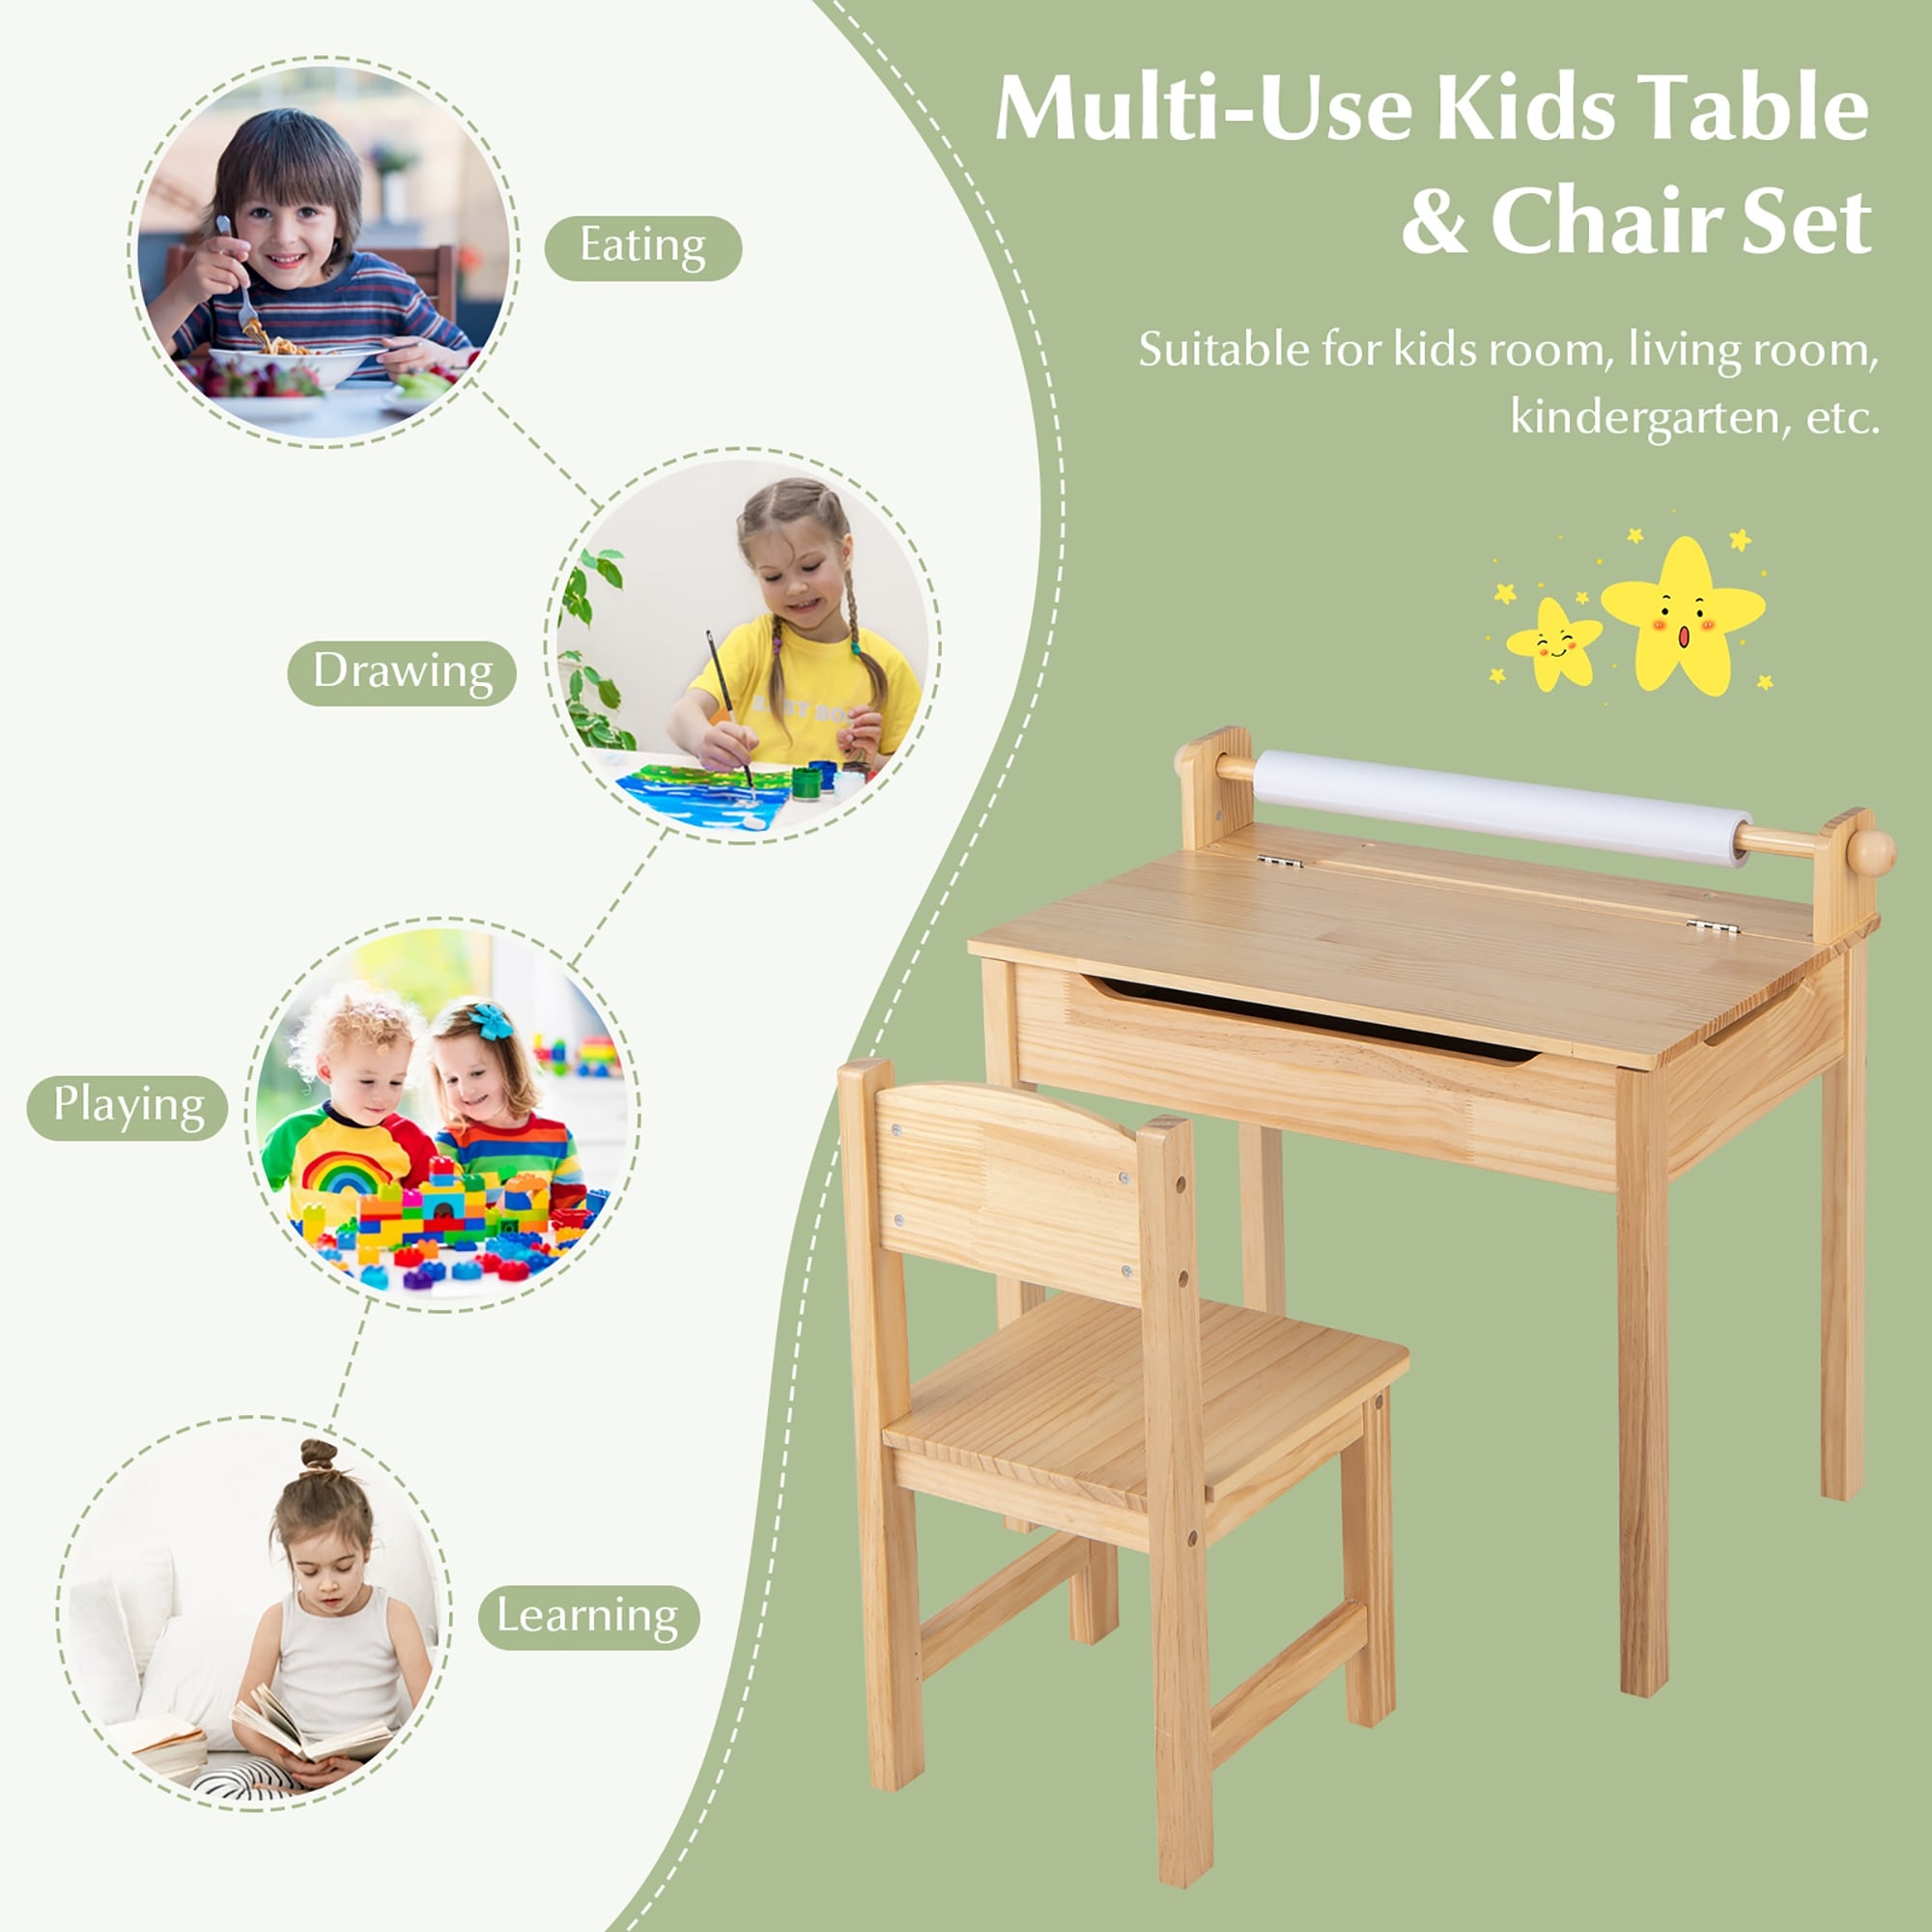 https://ak1.ostkcdn.com/images/products/is/images/direct/5a157e85a0af4996b06f102942400745d0204966/Costway-Toddler-Multi-Activity-Table-withChair-Kids-Art-%26-Crafts-Table.jpg